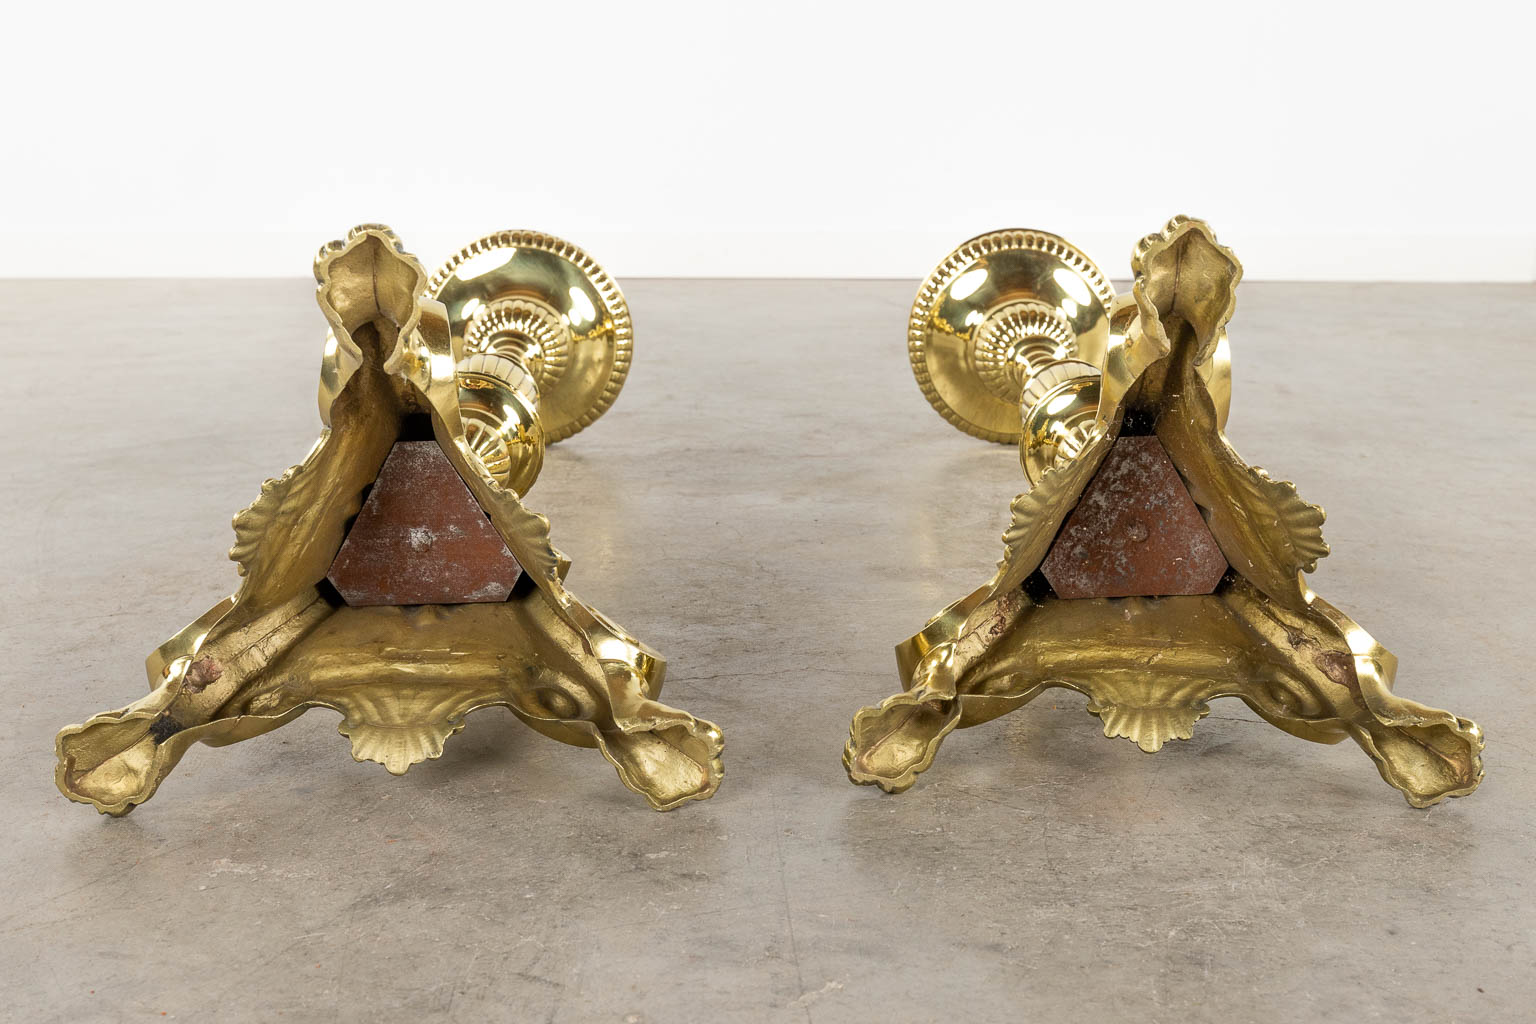 A pair of church candlesticks or candle holders polished bronze. 19th C. (D:24 x W:27 x H:88 cm)